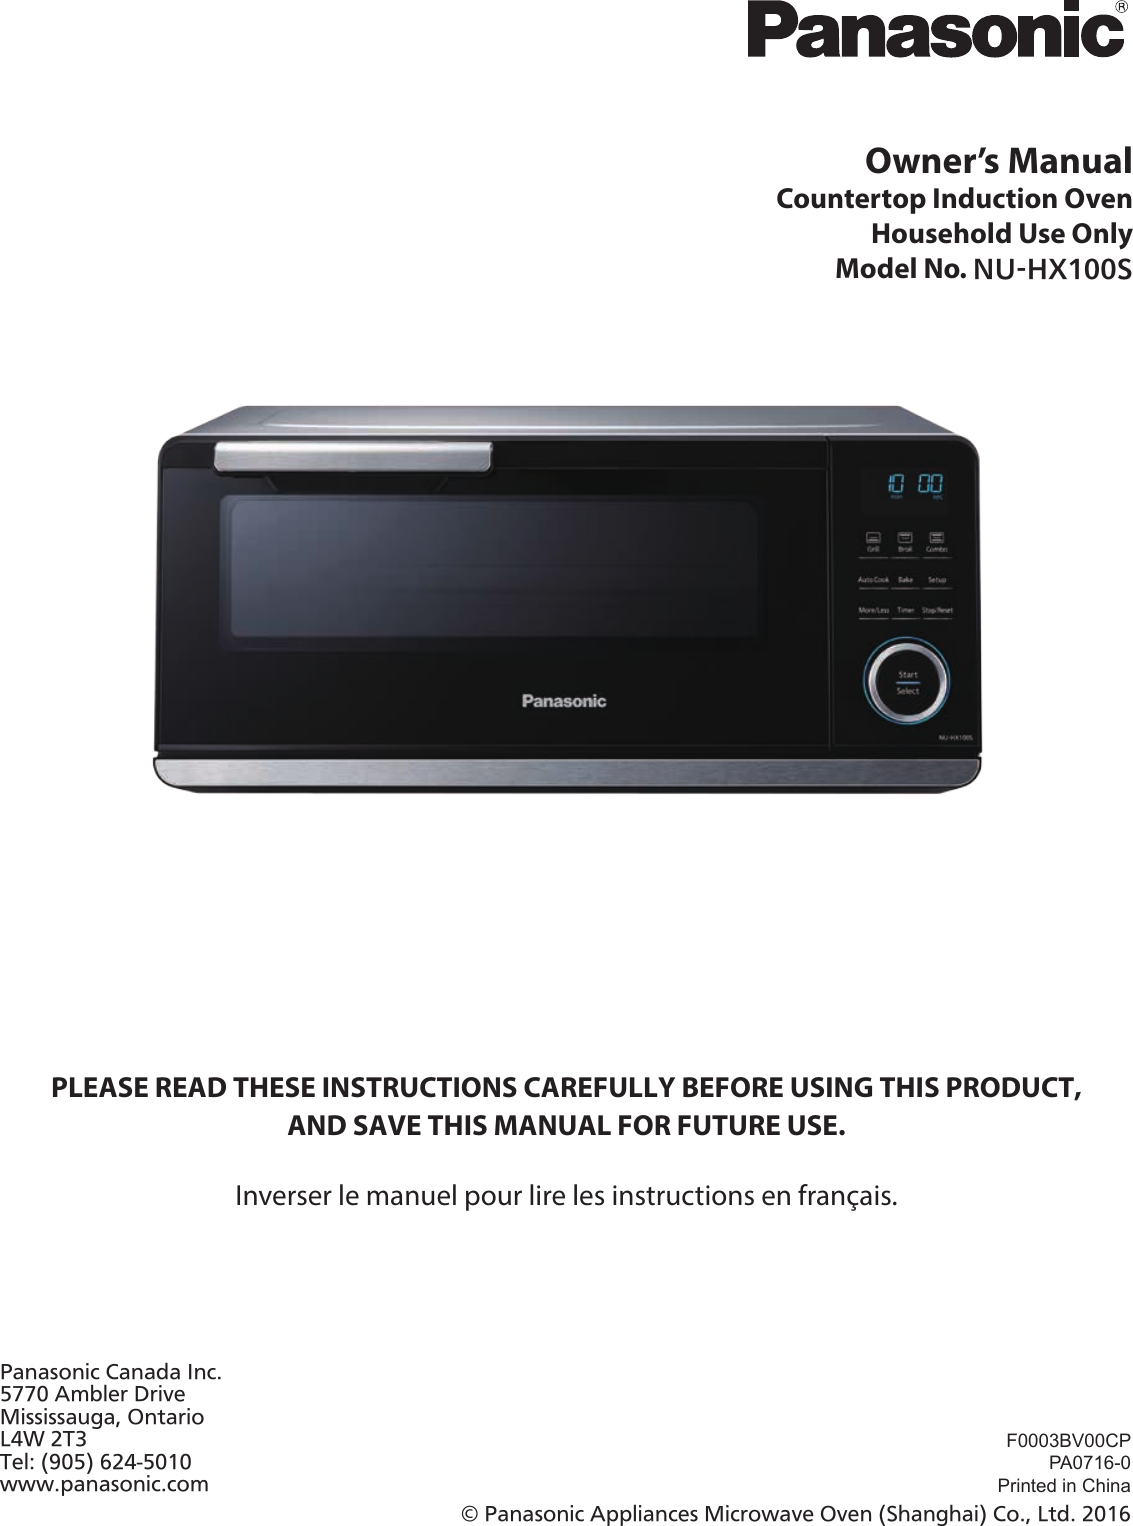 Owner’s Manual Countertop Induction OvenHousehold Use OnlyModel No. NU-HX100SPLEASE READ THESE INSTRUCTIONS CAREFULLY BEFORE USING THIS PRODUCT,  AND SAVE THIS MANUAL FOR FUTURE USE.Inverser le manuel pour lire les instructions en français.F0003BV00CPPA0716-0Printed in China© Panasonic Appliances Microwave Oven (Shanghai) Co., Ltd. 2016Panasonic Canada Inc.5770 Ambler DriveMississauga, OntarioL4W 2T3Tel: (905) 624-5010www.panasonic.com